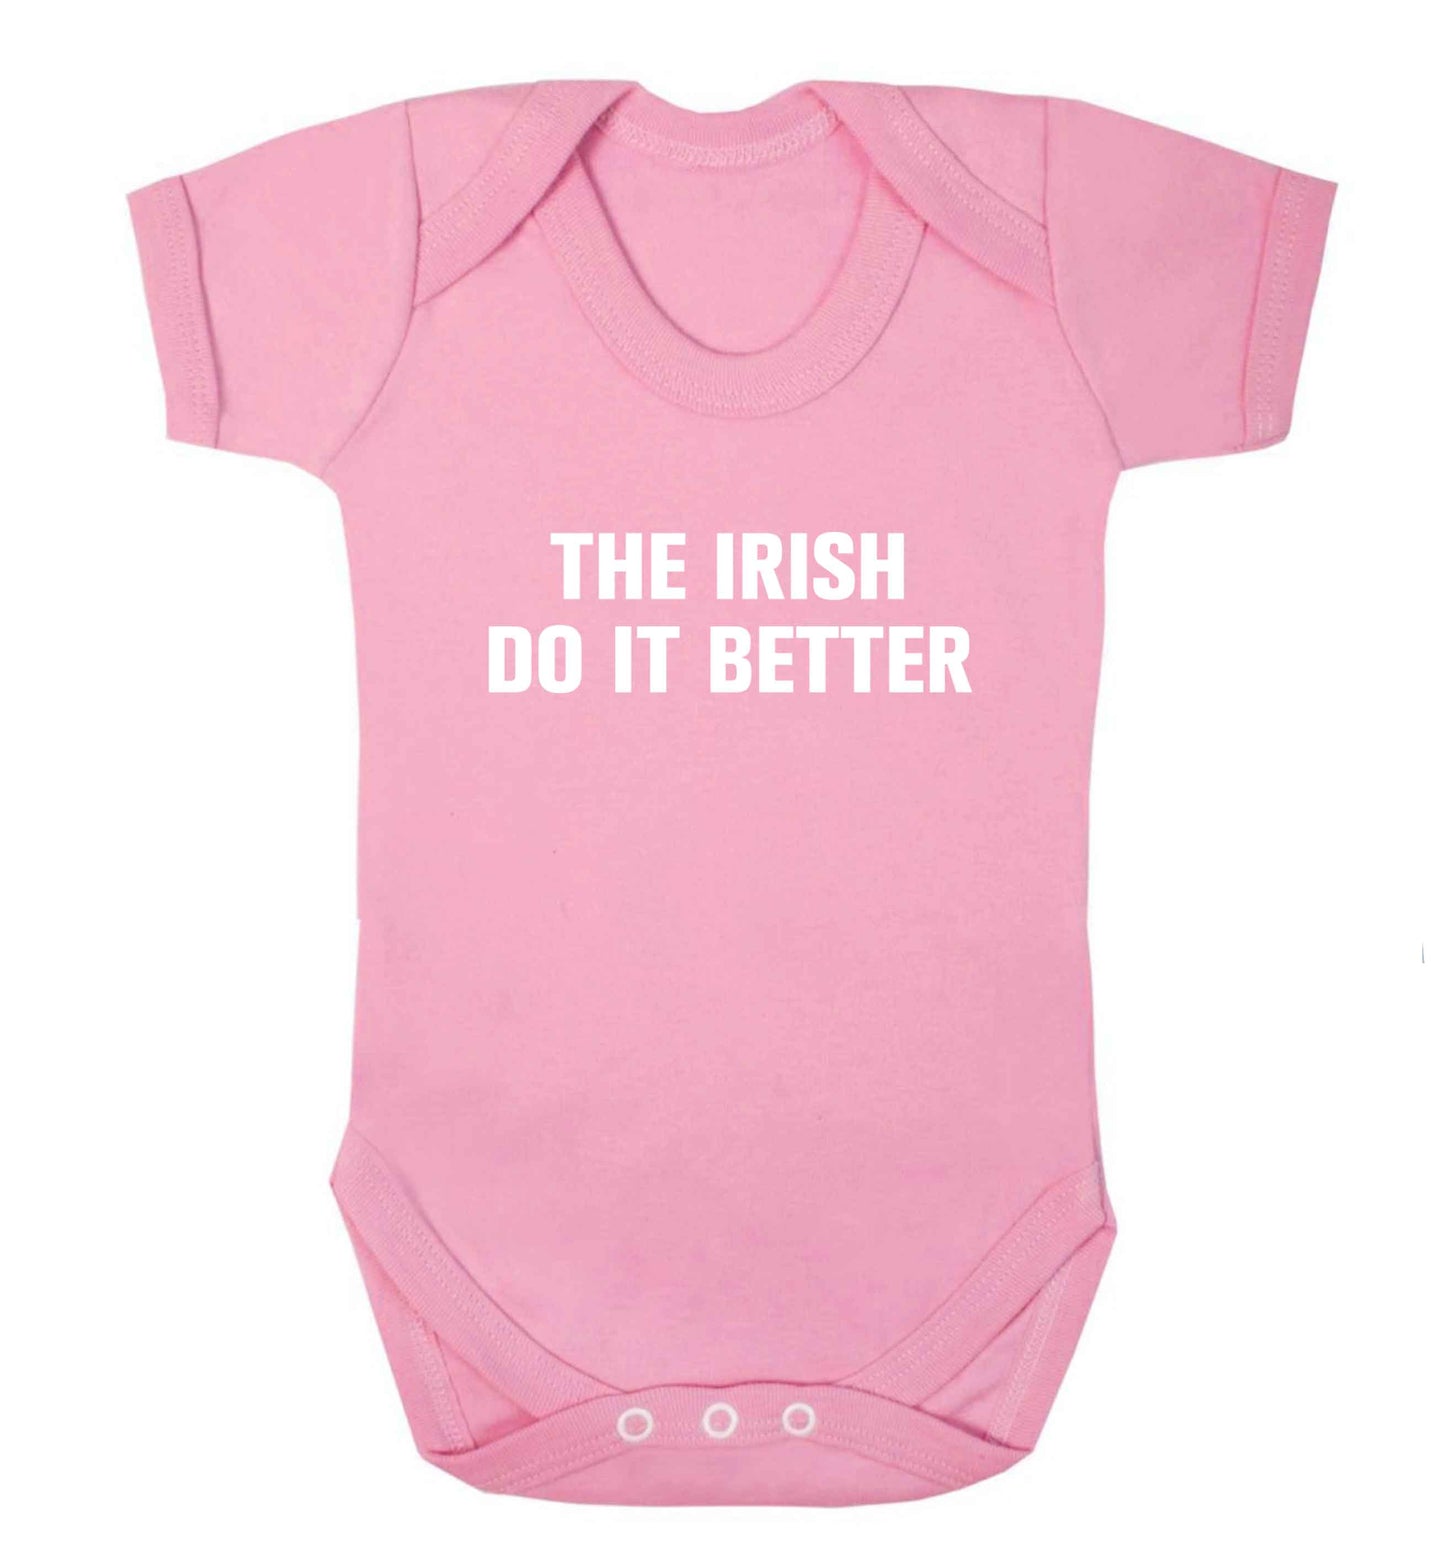 The Irish do it better baby vest pale pink 18-24 months